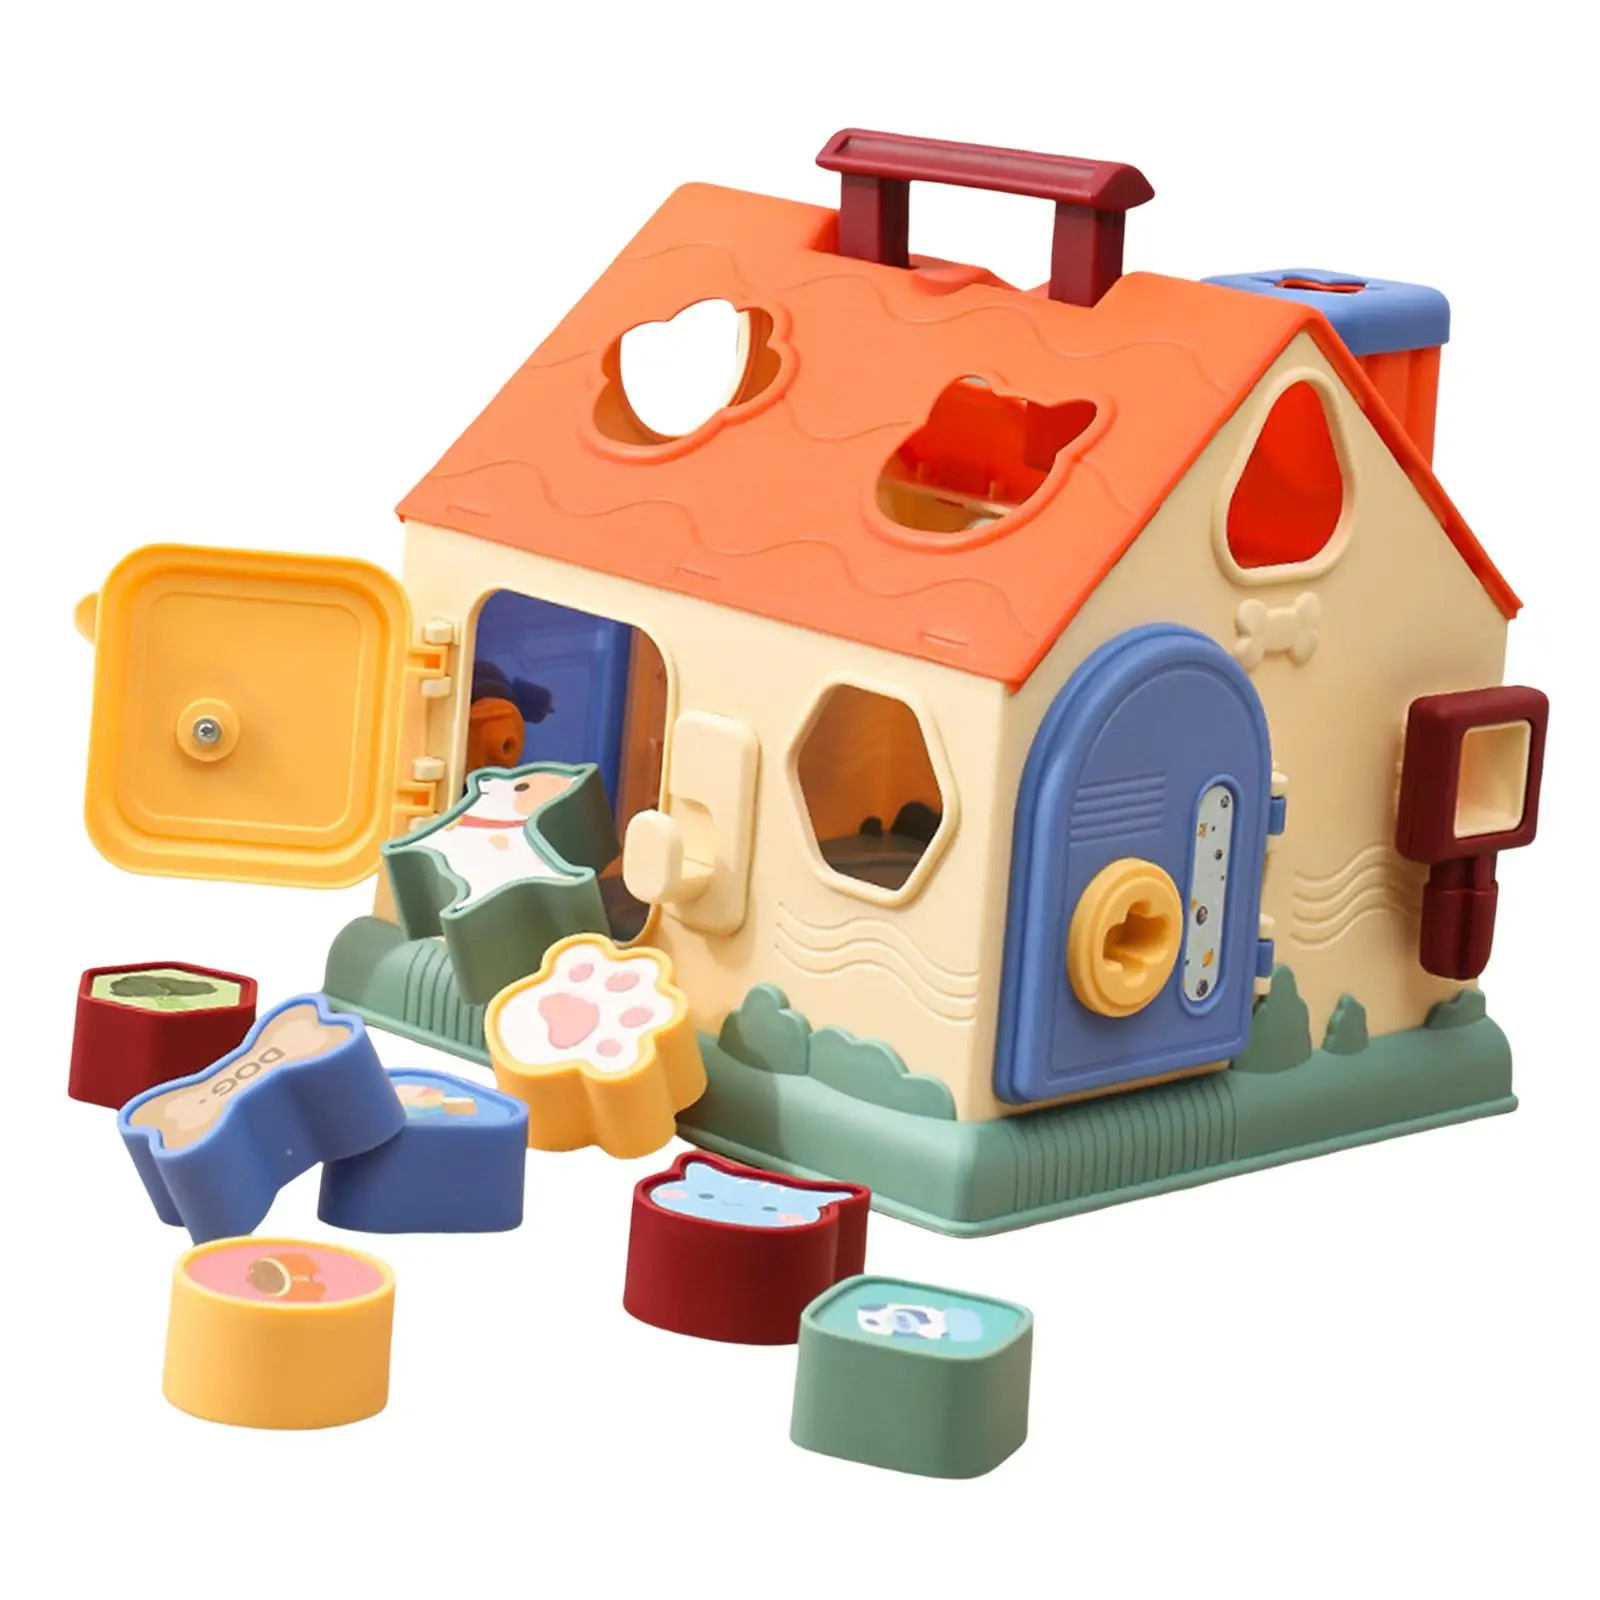 Shape Sorter House Sensory Toy Fine Motor Skills Color Shape Sorting Matching Toy for Ages 3 4 5 Years Old Holiday Gift Kids